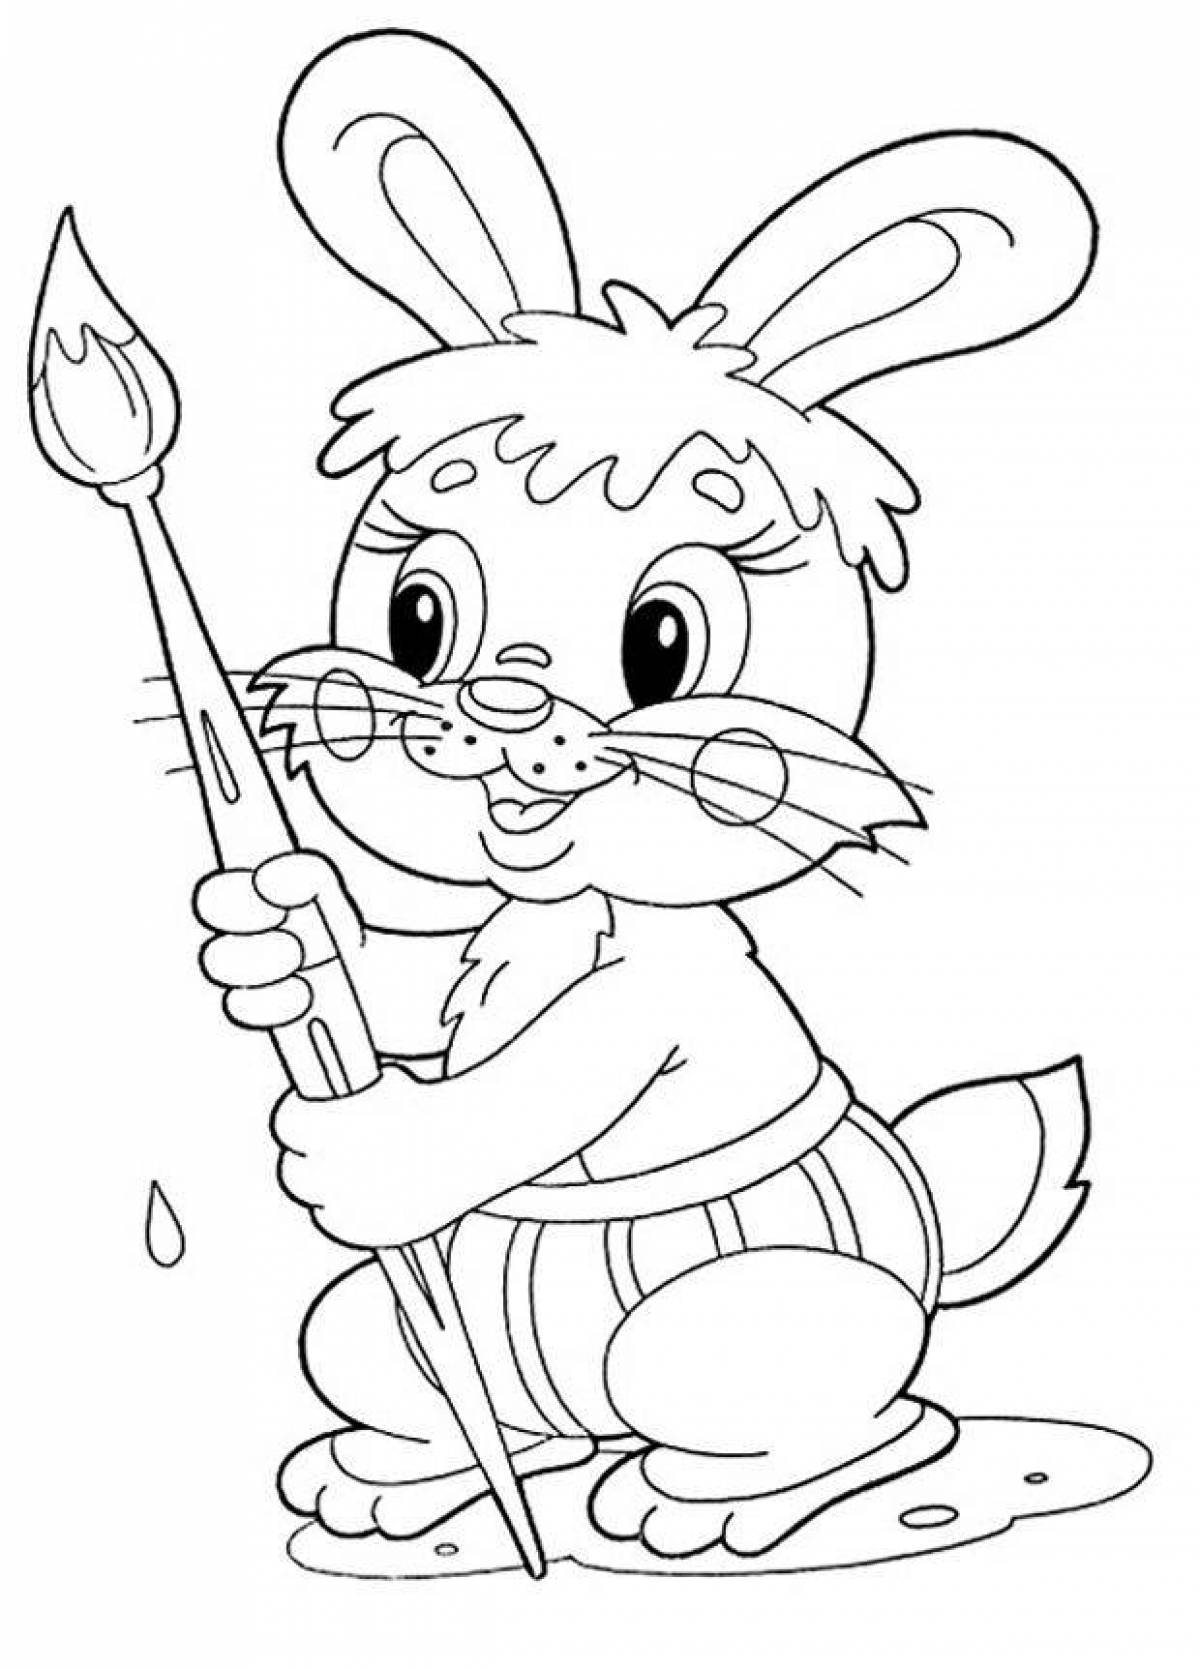 Snug coloring page bunny picture